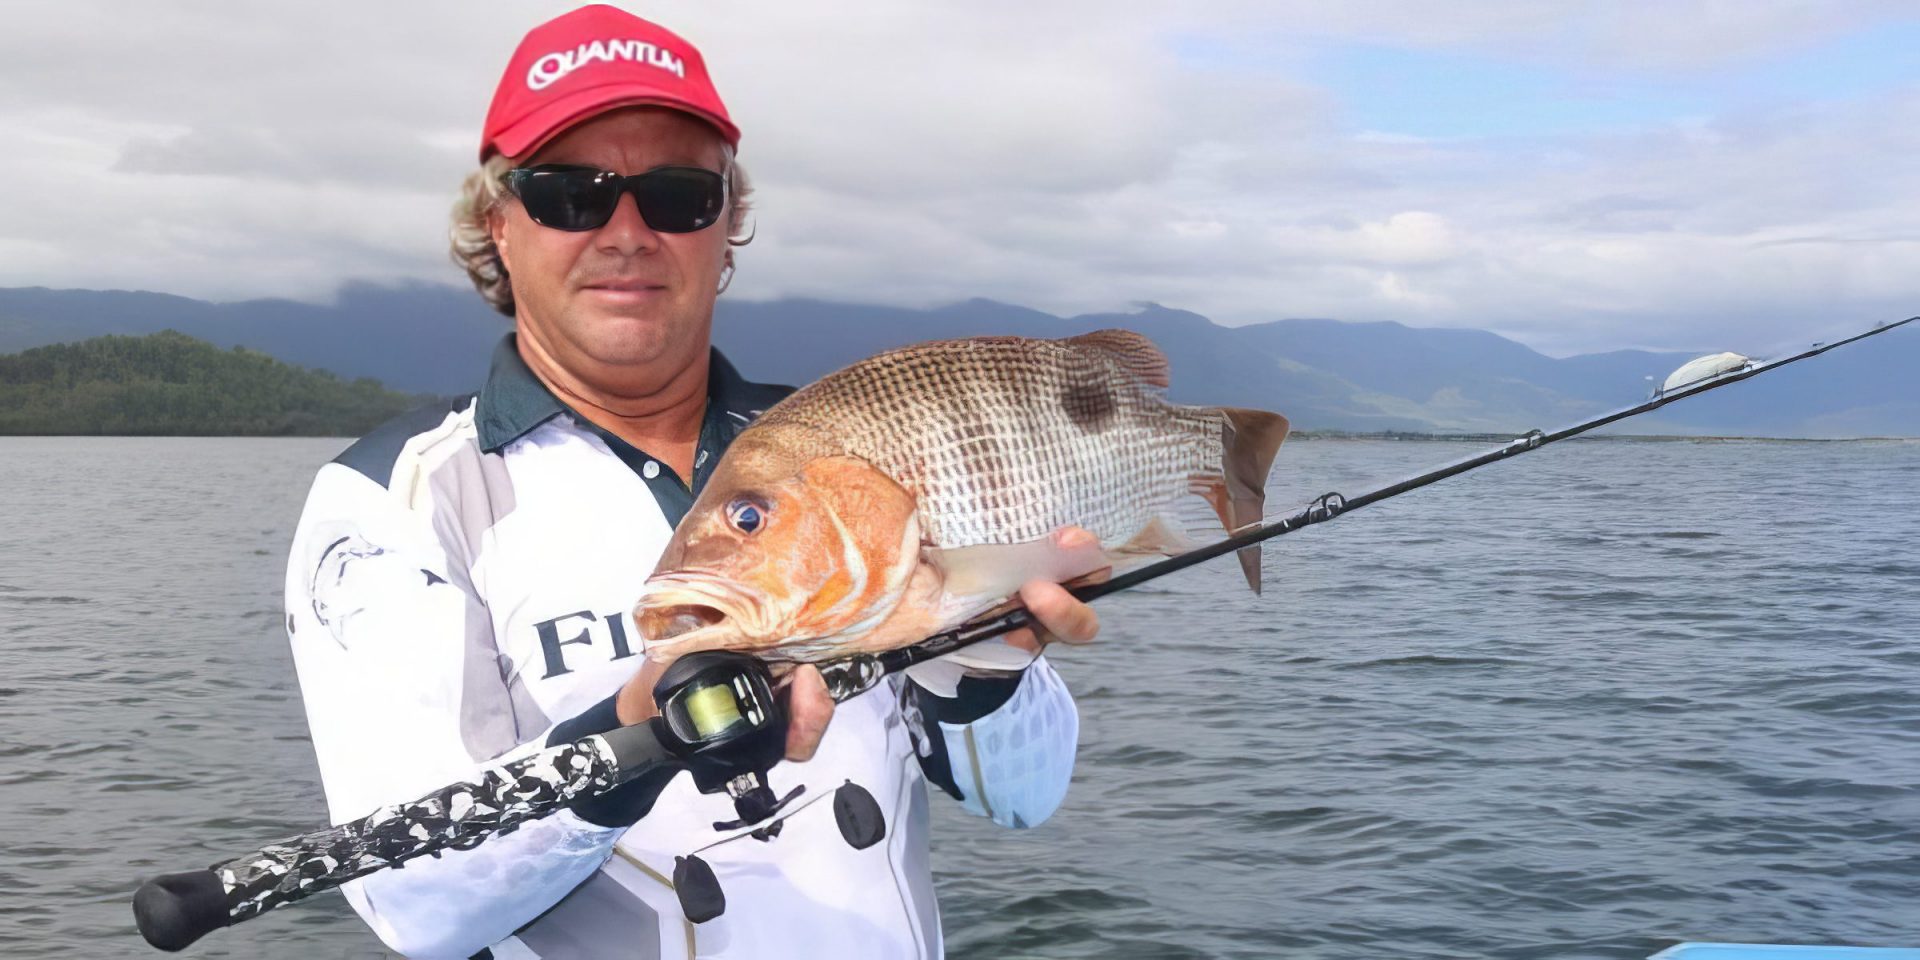 Set your drag correctly and catch bigger fish - Ryan Moody Fishing